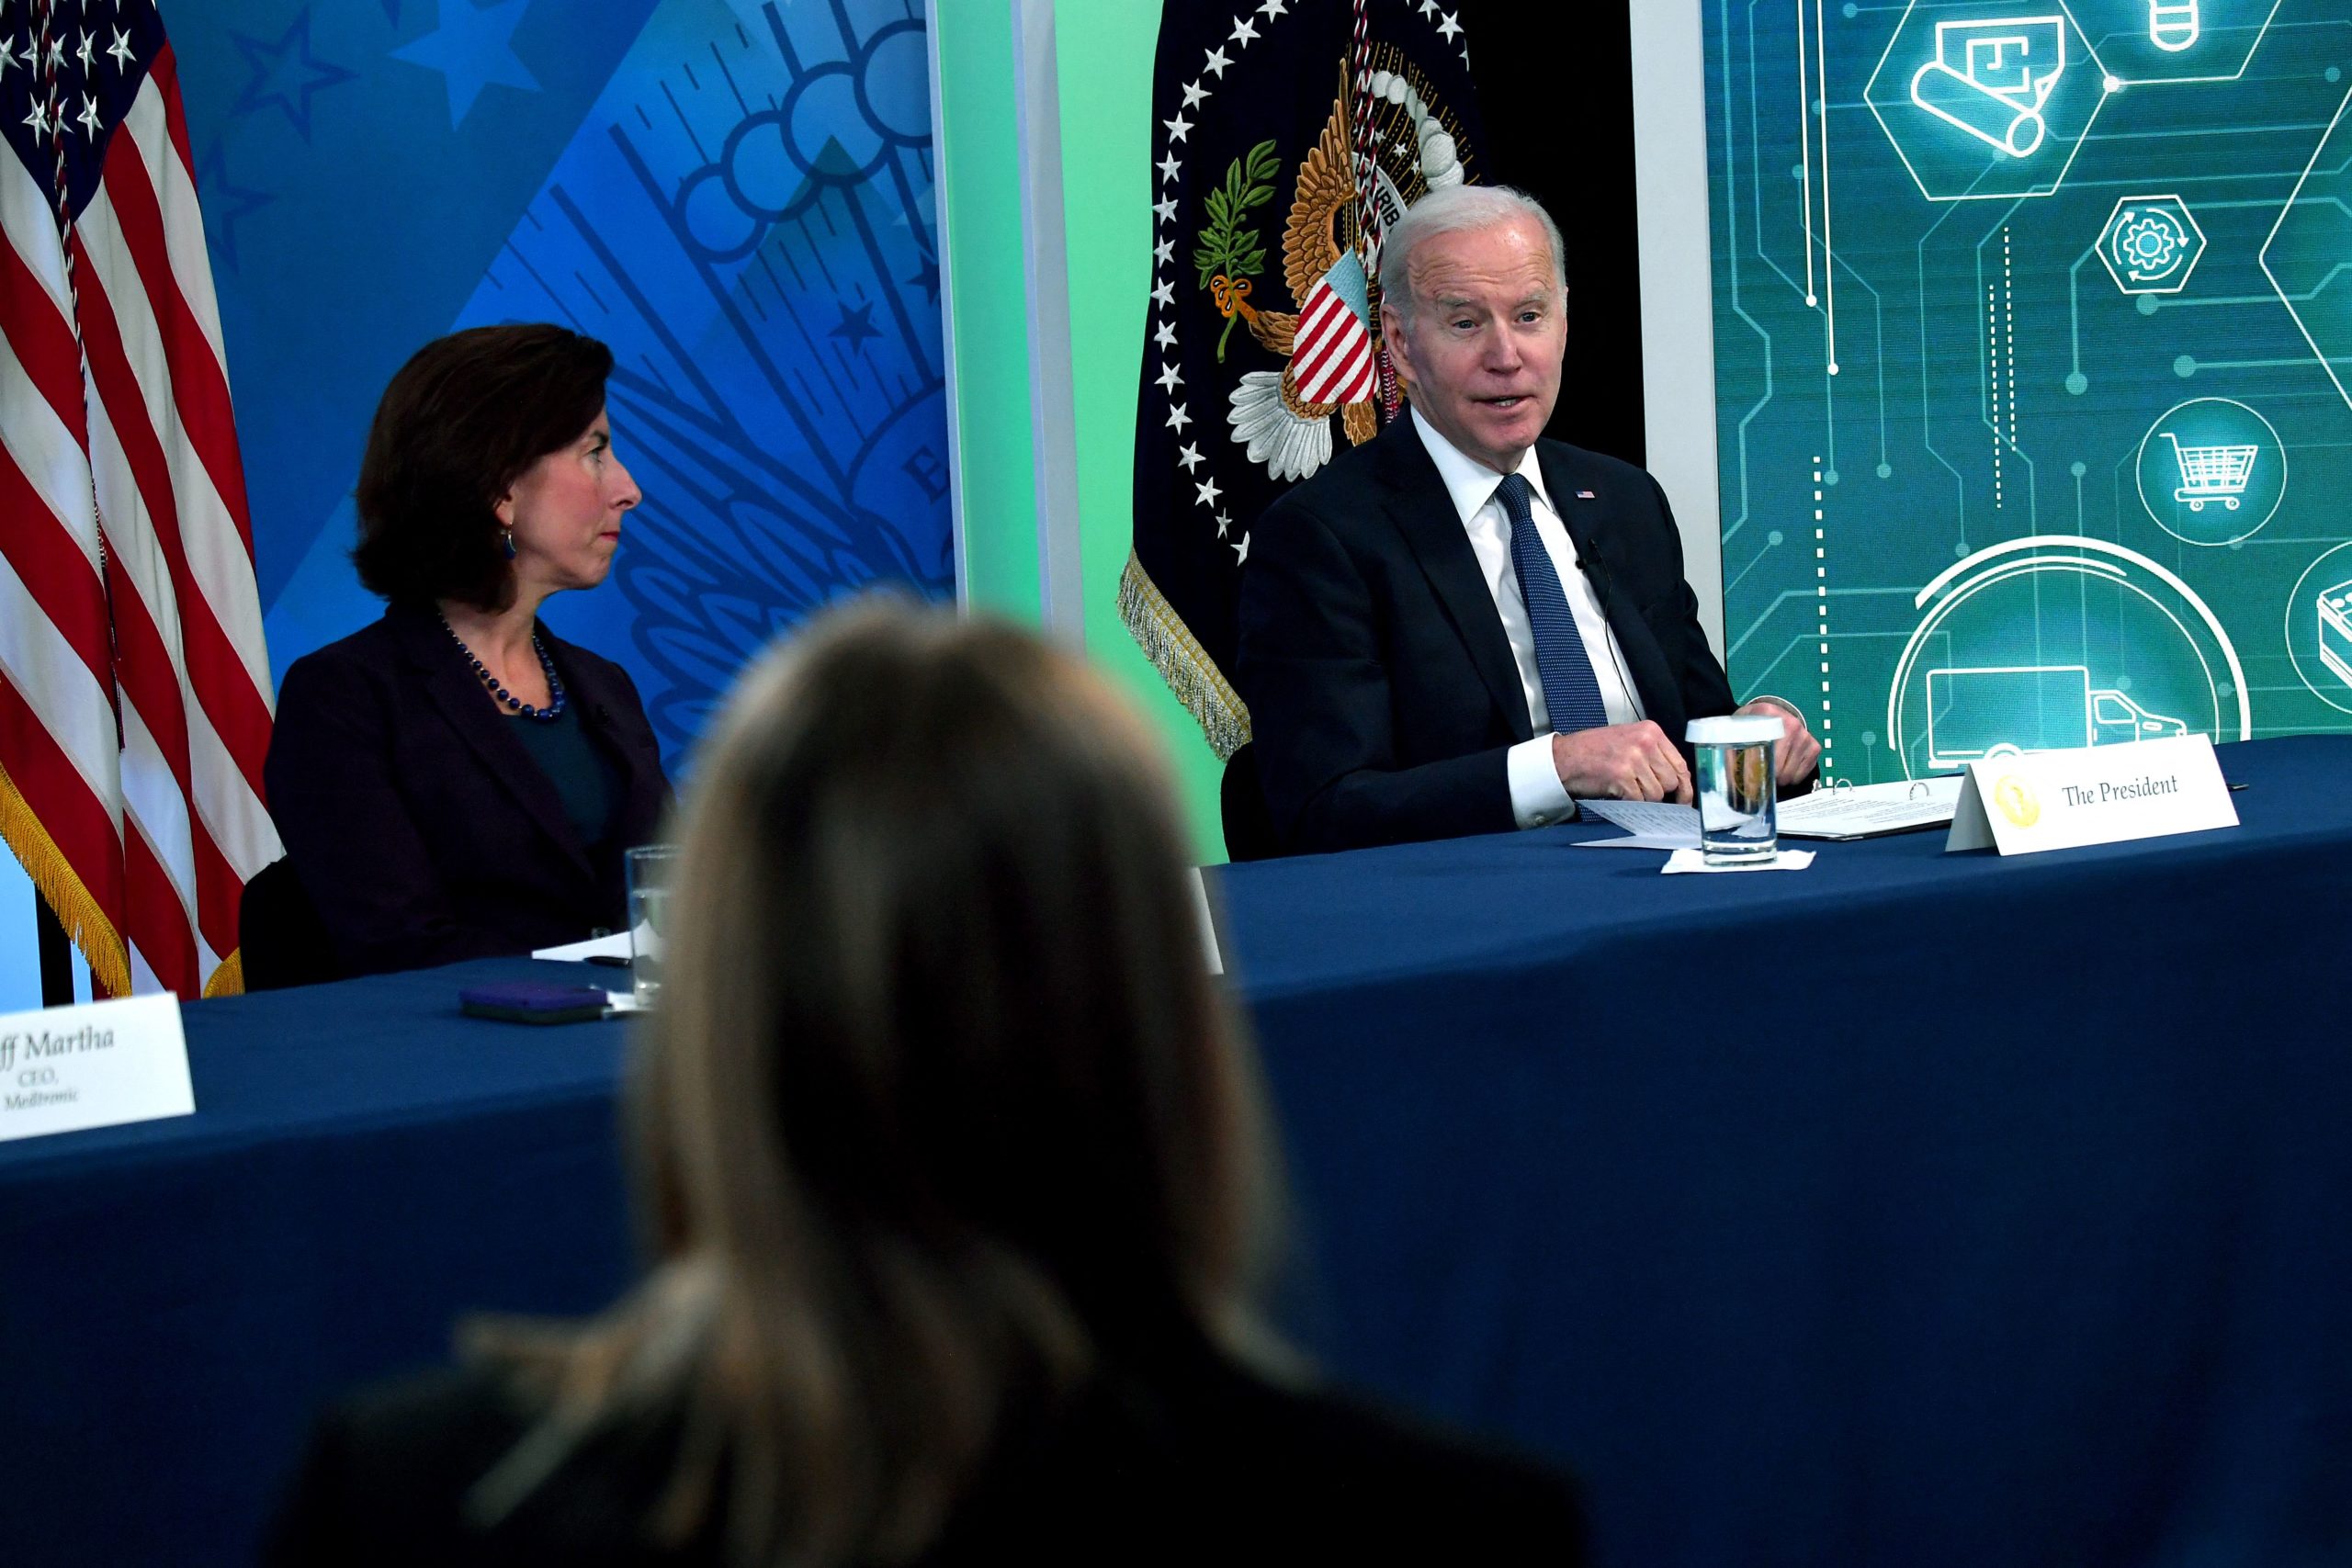 Secretary of Commerce Gina Raimondo listens as President Joe Biden speaks during a meeting with business leaders on March 9. (Nicholas Kamm/AFP via Getty Images)